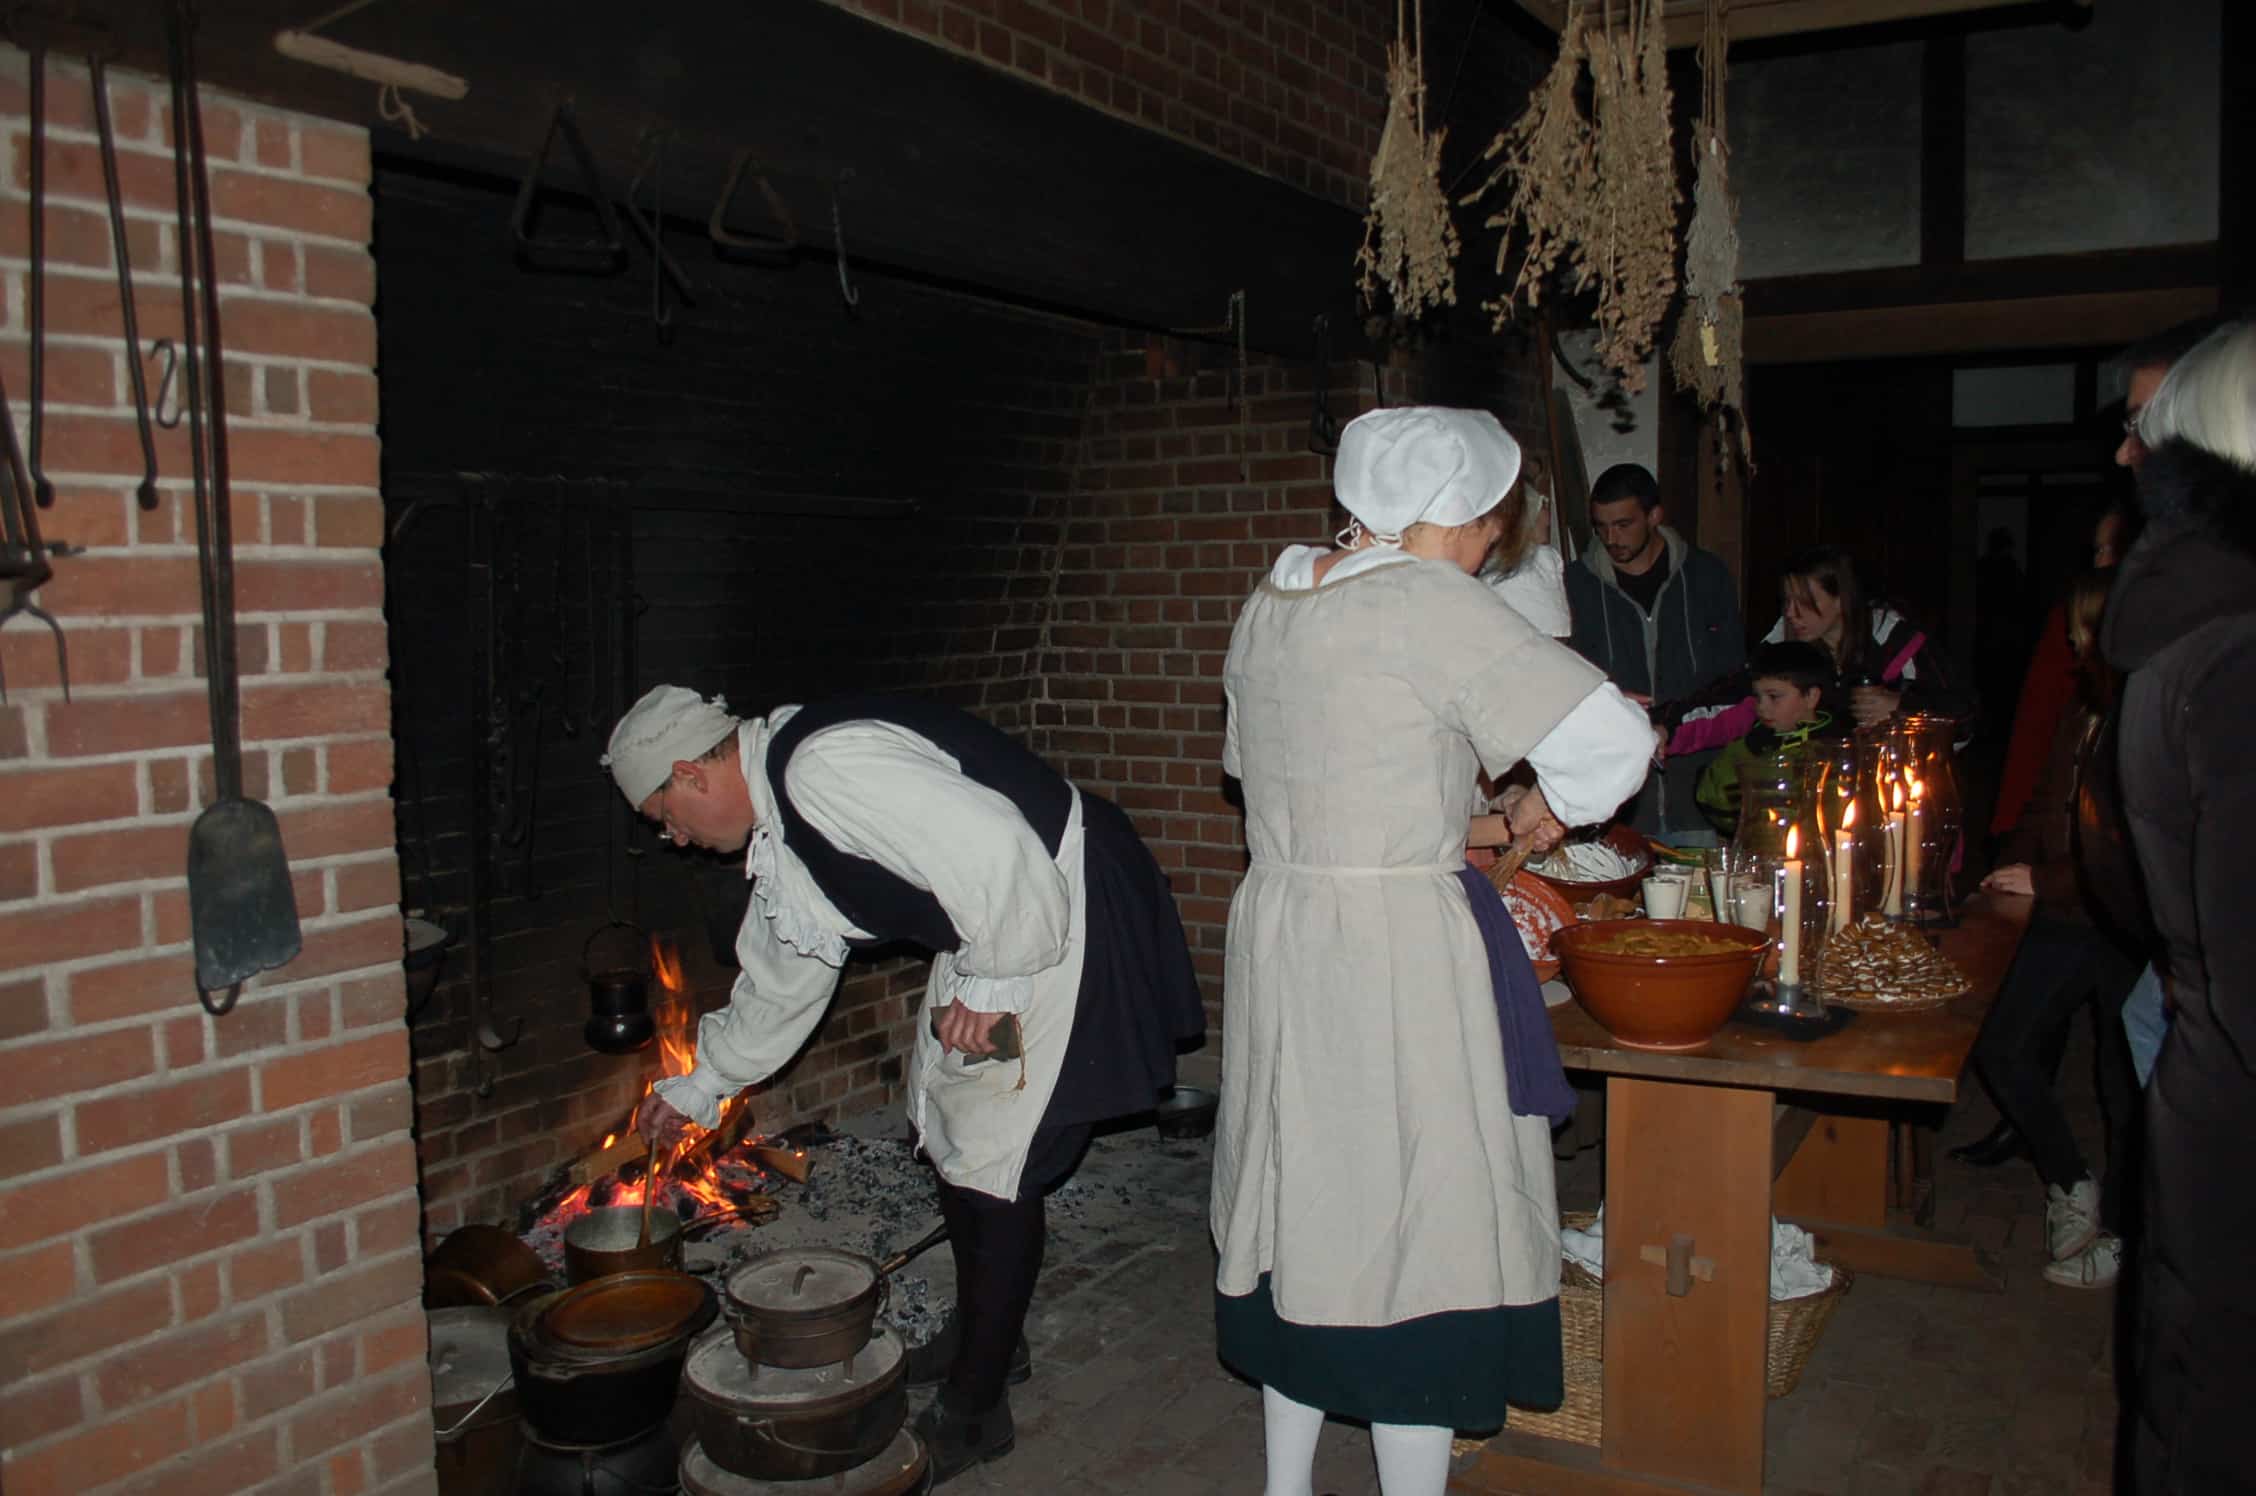 cooking over an open hearth